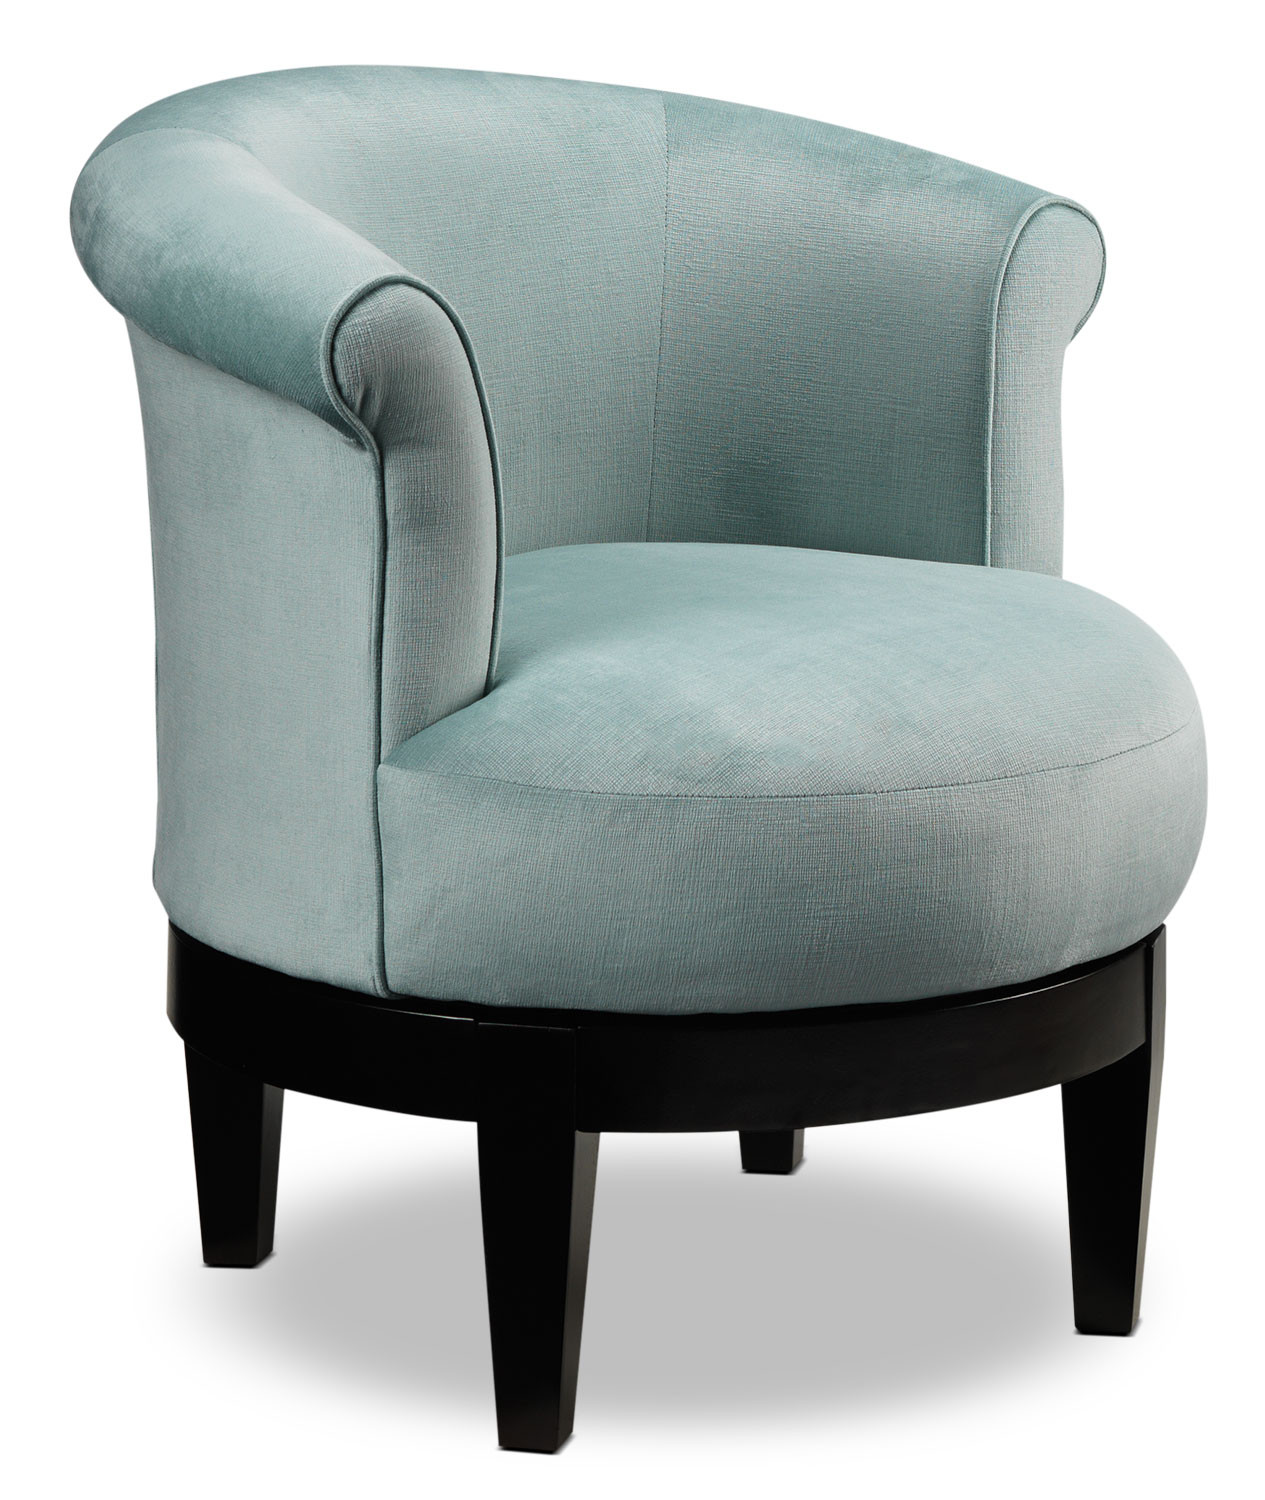 Occasional Chairs For Living Room
 Attica Swivel Accent Chair Aqua